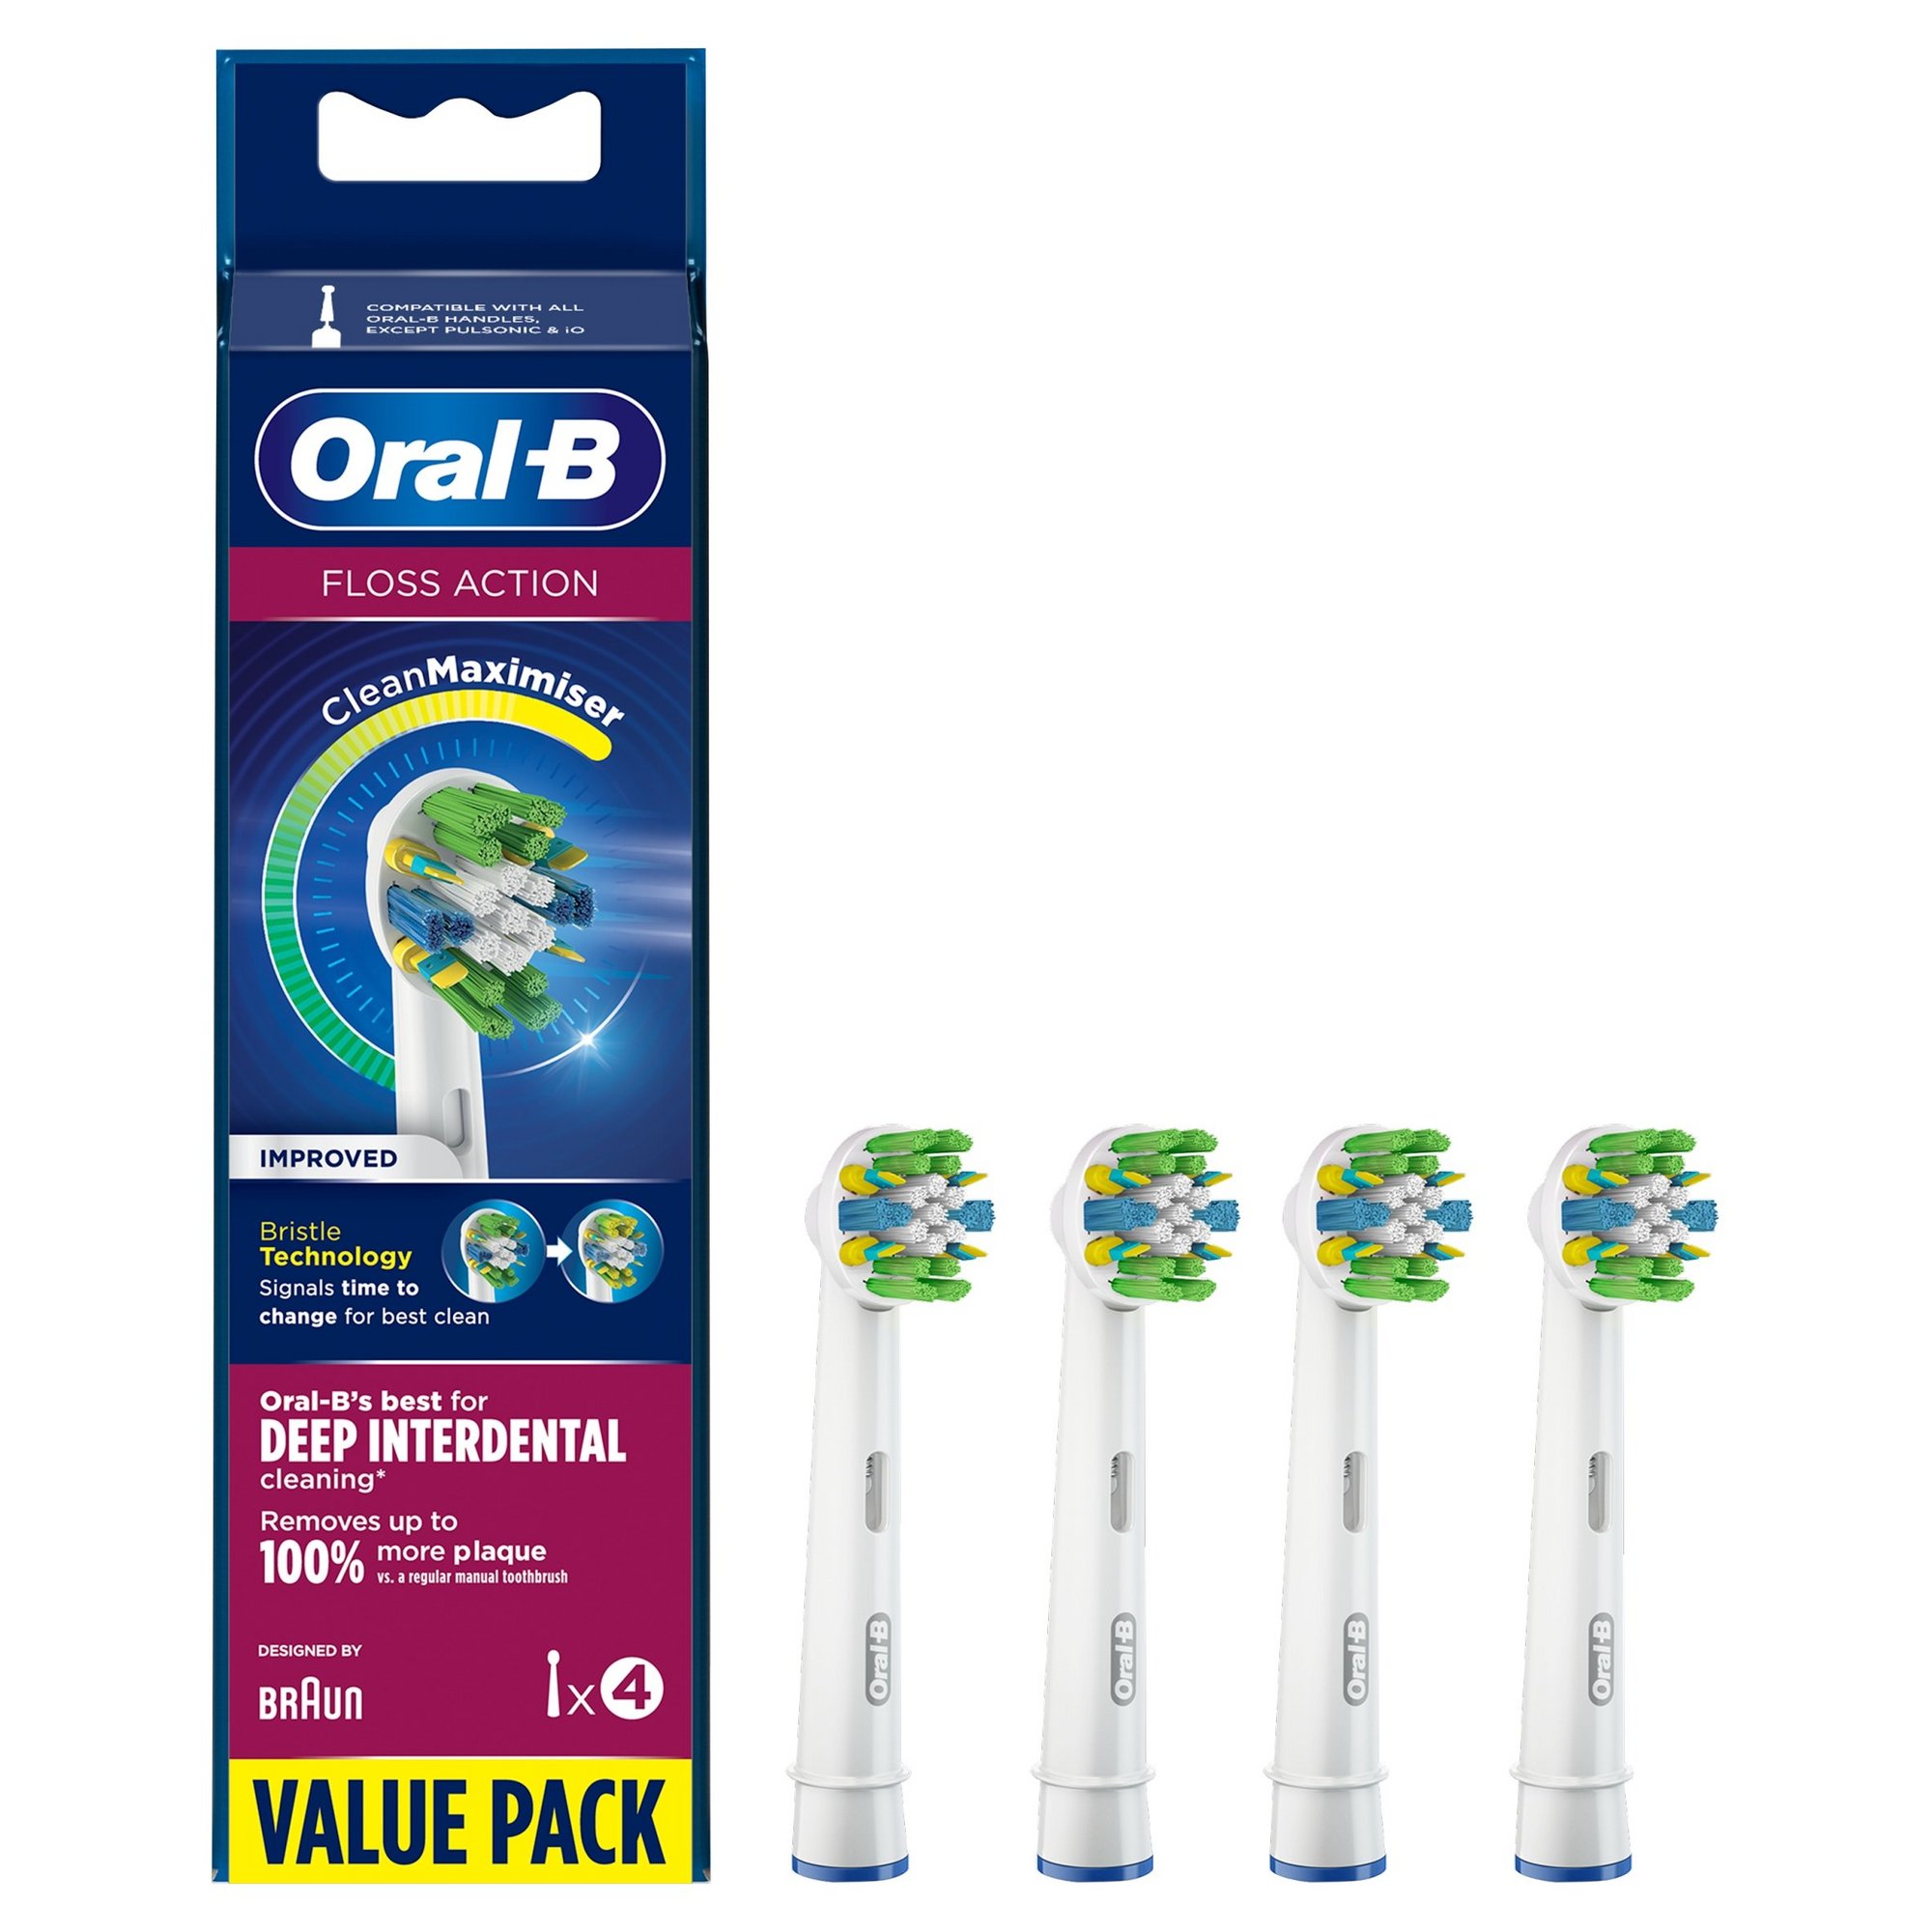 Oral B Pack of 4 Floss Action-Clean Maximiser Toothbrush Heads